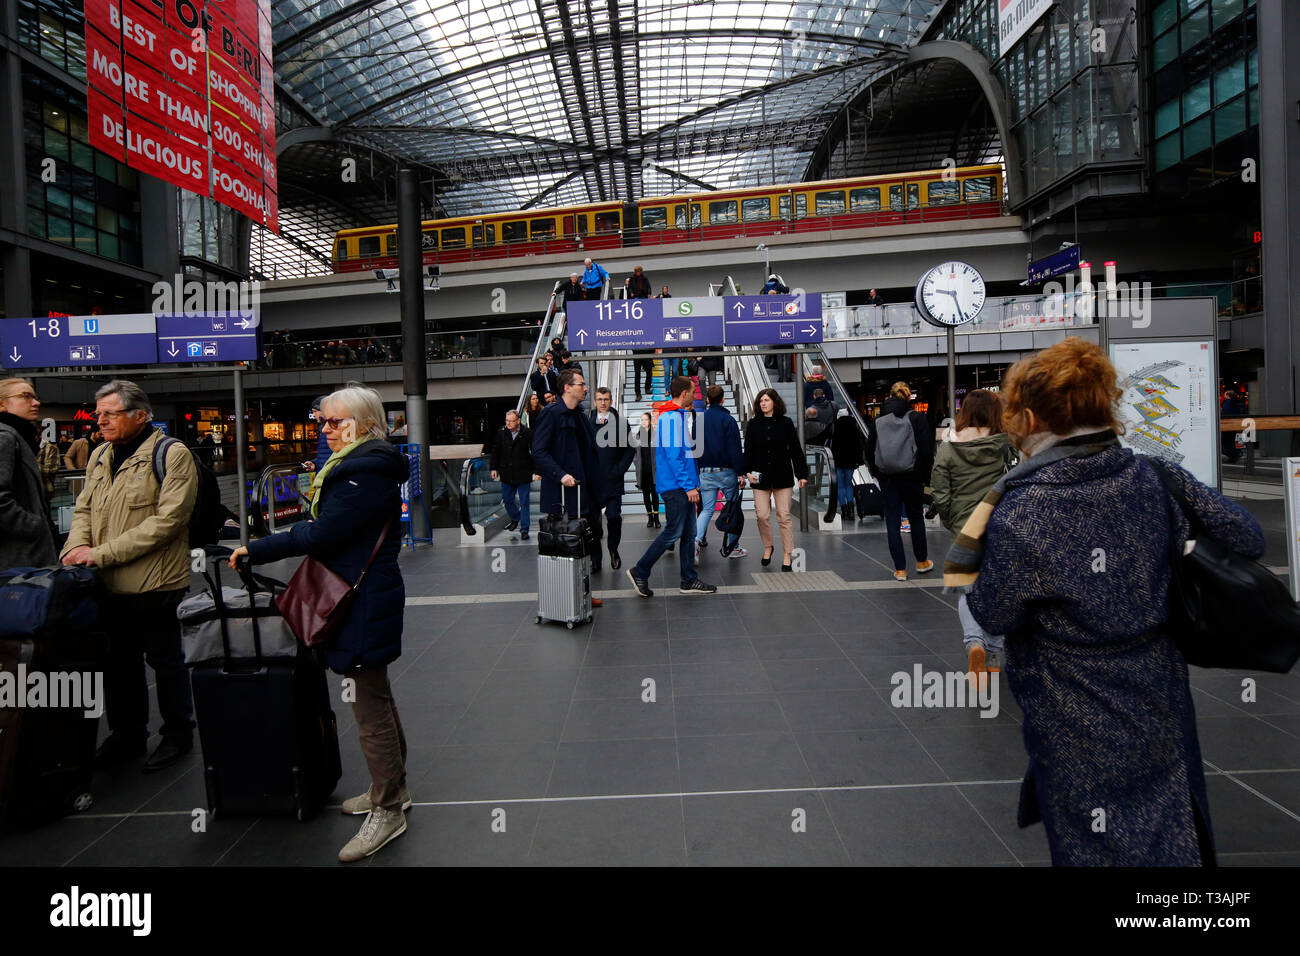 Commuters, travelers, tourists inside Berlin Hauptbahnhof shopping mall with an S Bahn train passing through overhead, Berlin, Germany Stock Photo